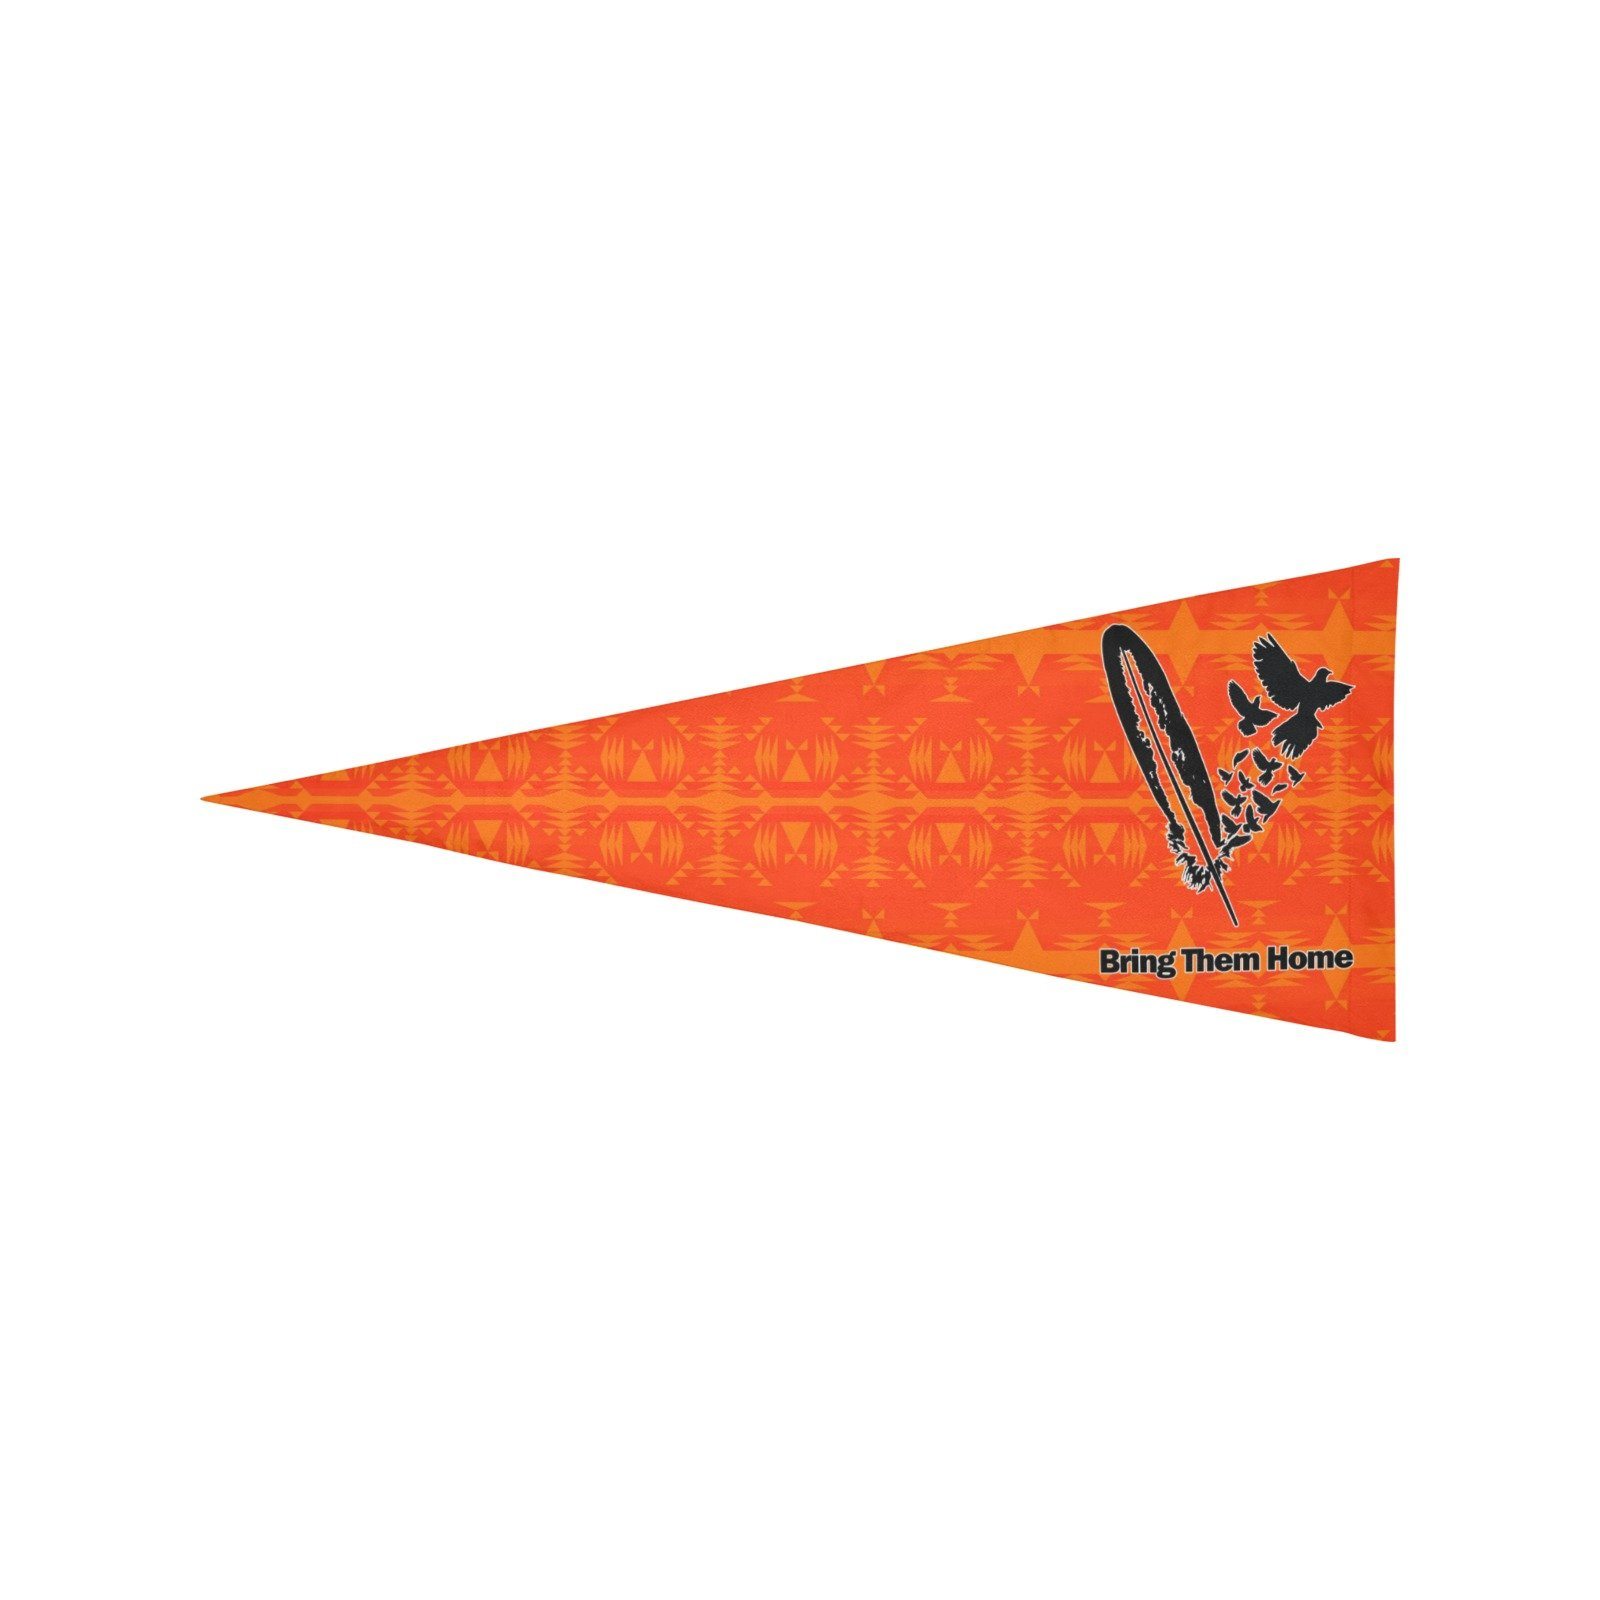 Between the Mountains Orange Bring Them Home Trigonal Garden Flag 30"x12" Trigonal Garden Flag 30"x12" e-joyer 